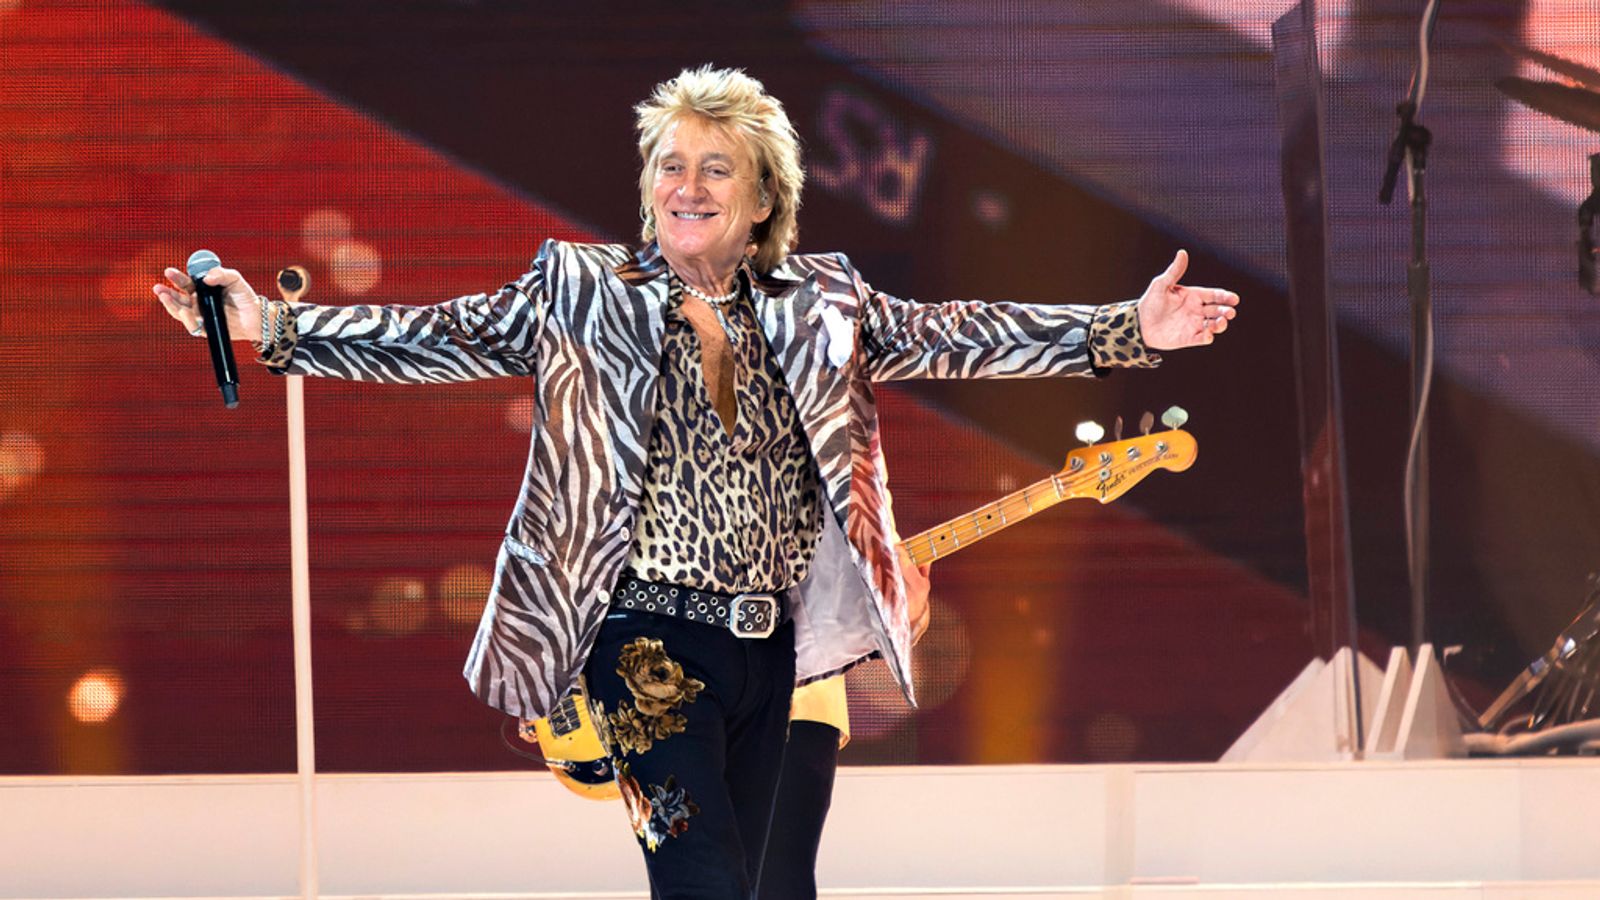 Sir Rod Stewart defends support for Ukraine after being 'booed' by German crowd